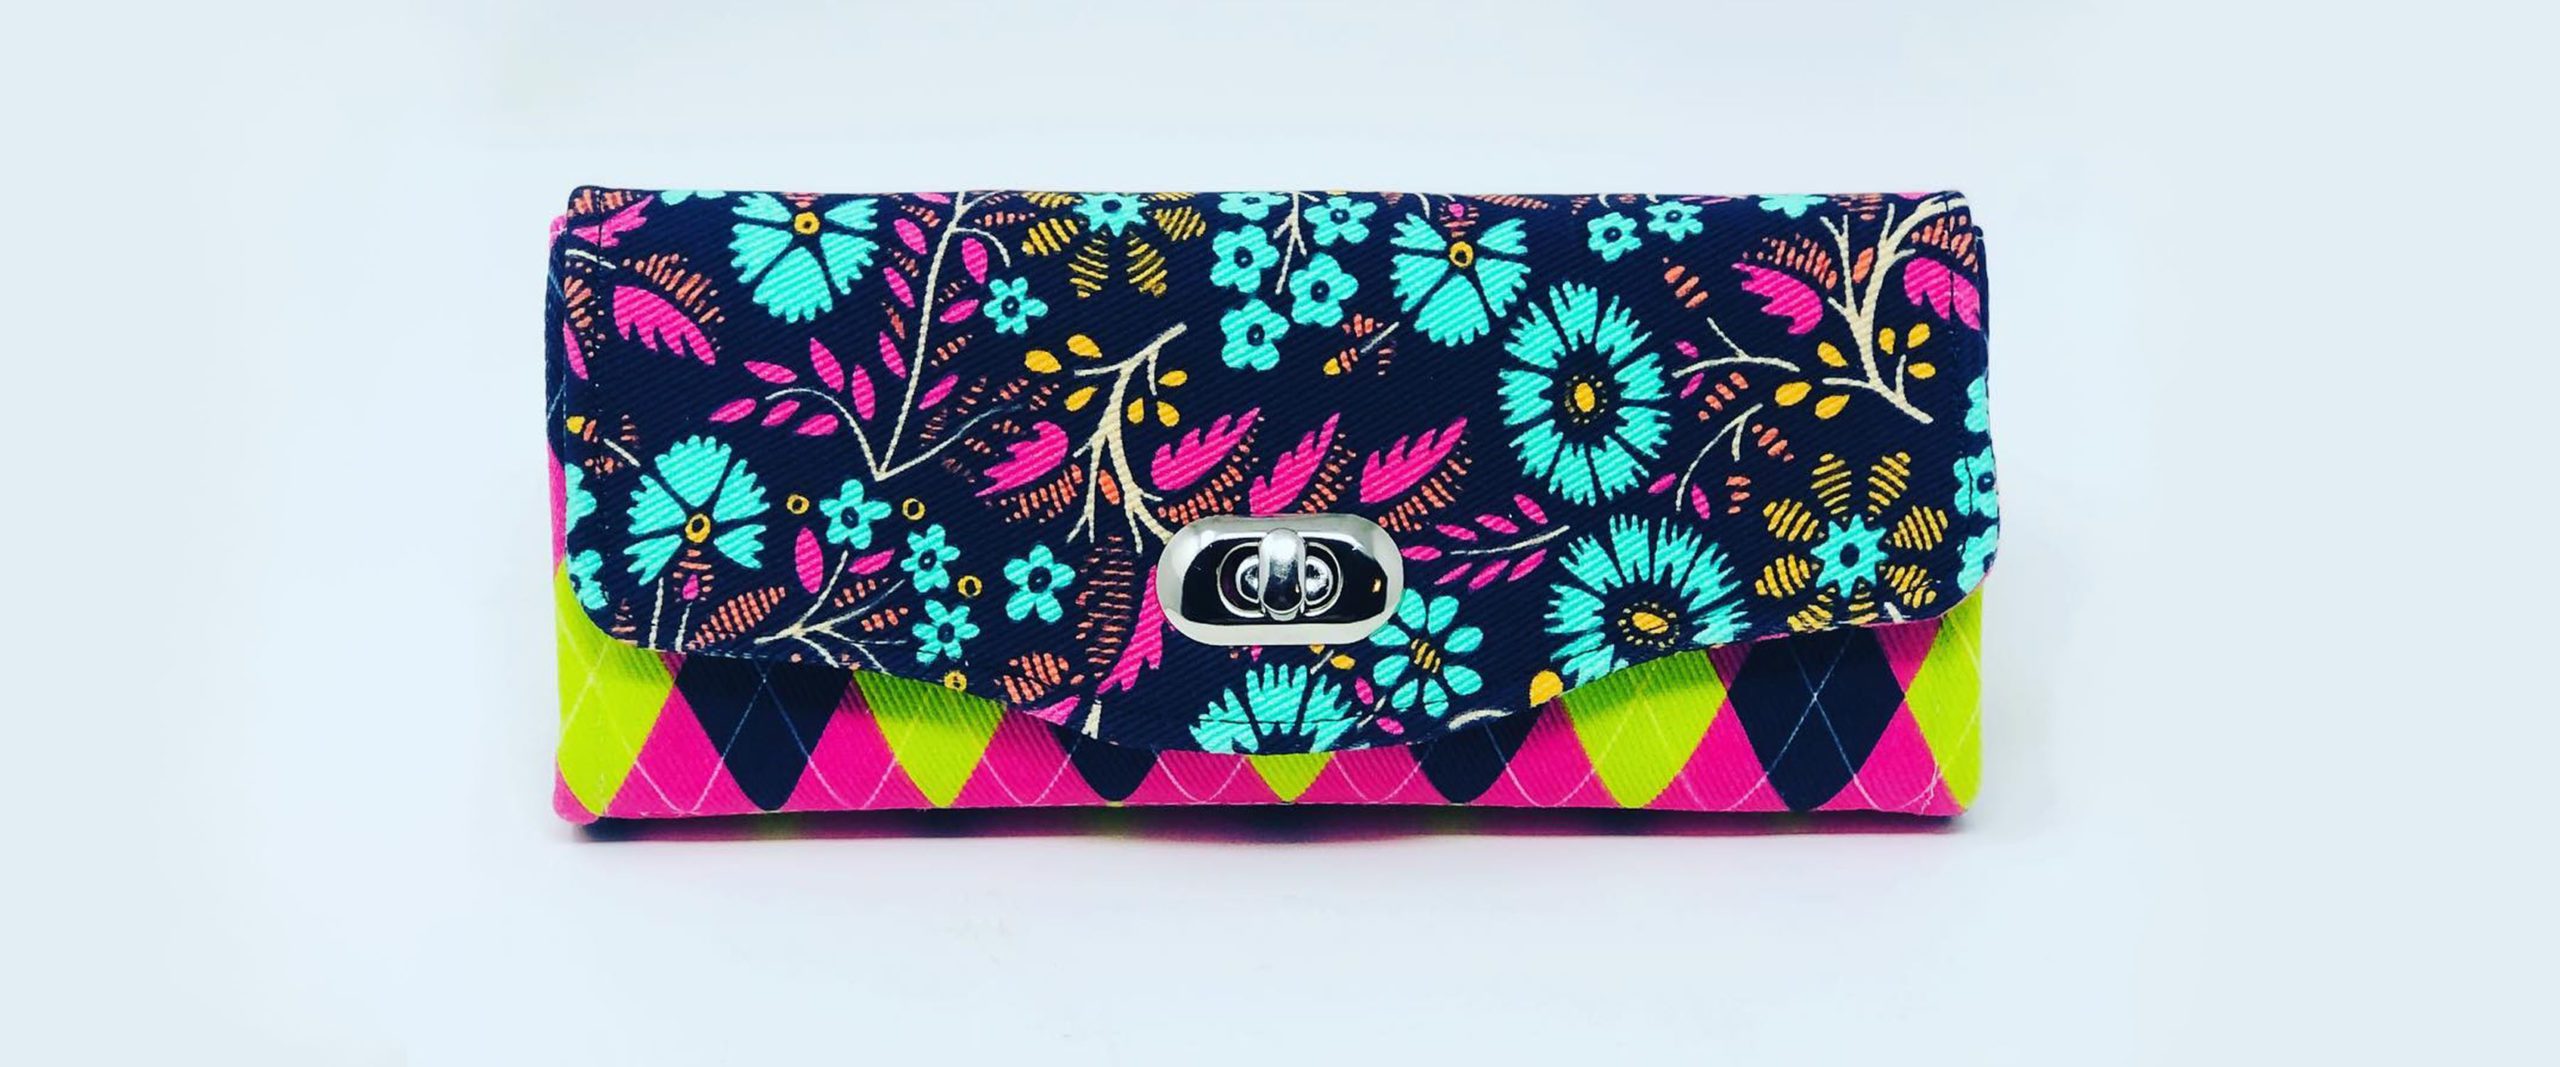 a brightly colored clutch wallet with a clasp and floral fabric